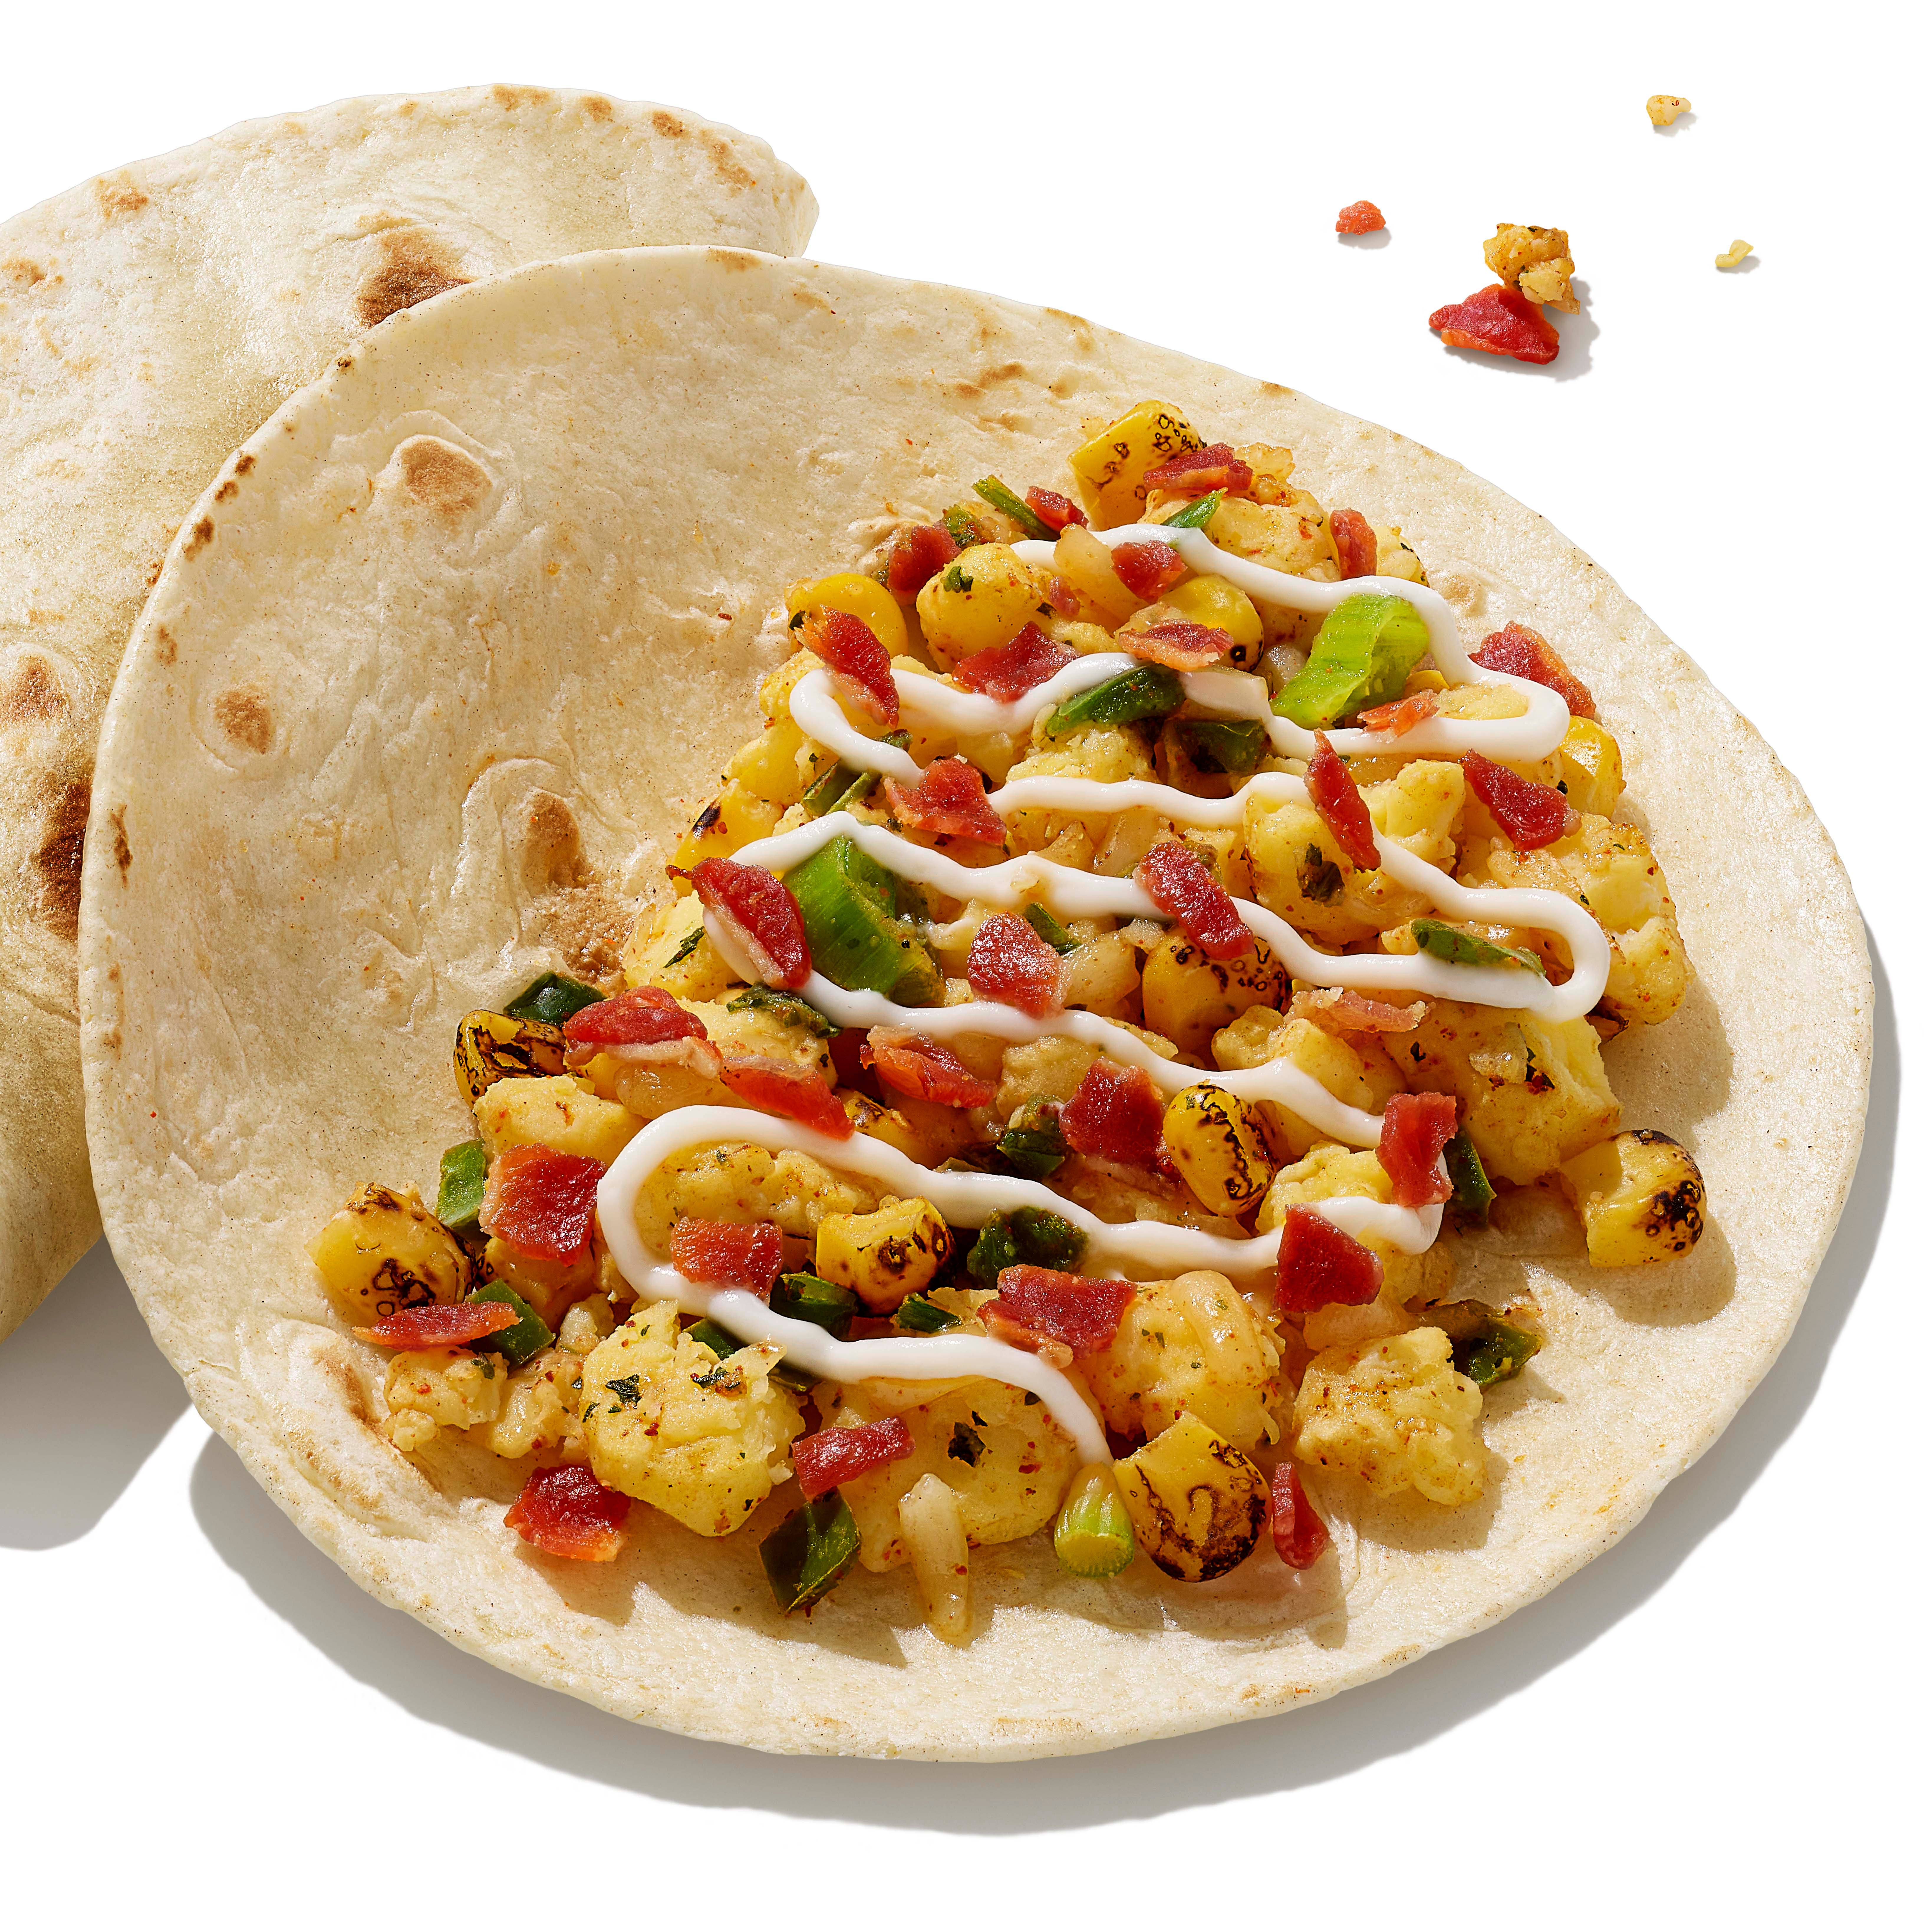 Dunkin has begun offering Breakfast Tacos as of Wednesday, March 22, with scrambled eggs, melted sharp white cheddar cheese, fire-roasted corn, and a drizzle of tangy lime crema in a warm flour tortilla.